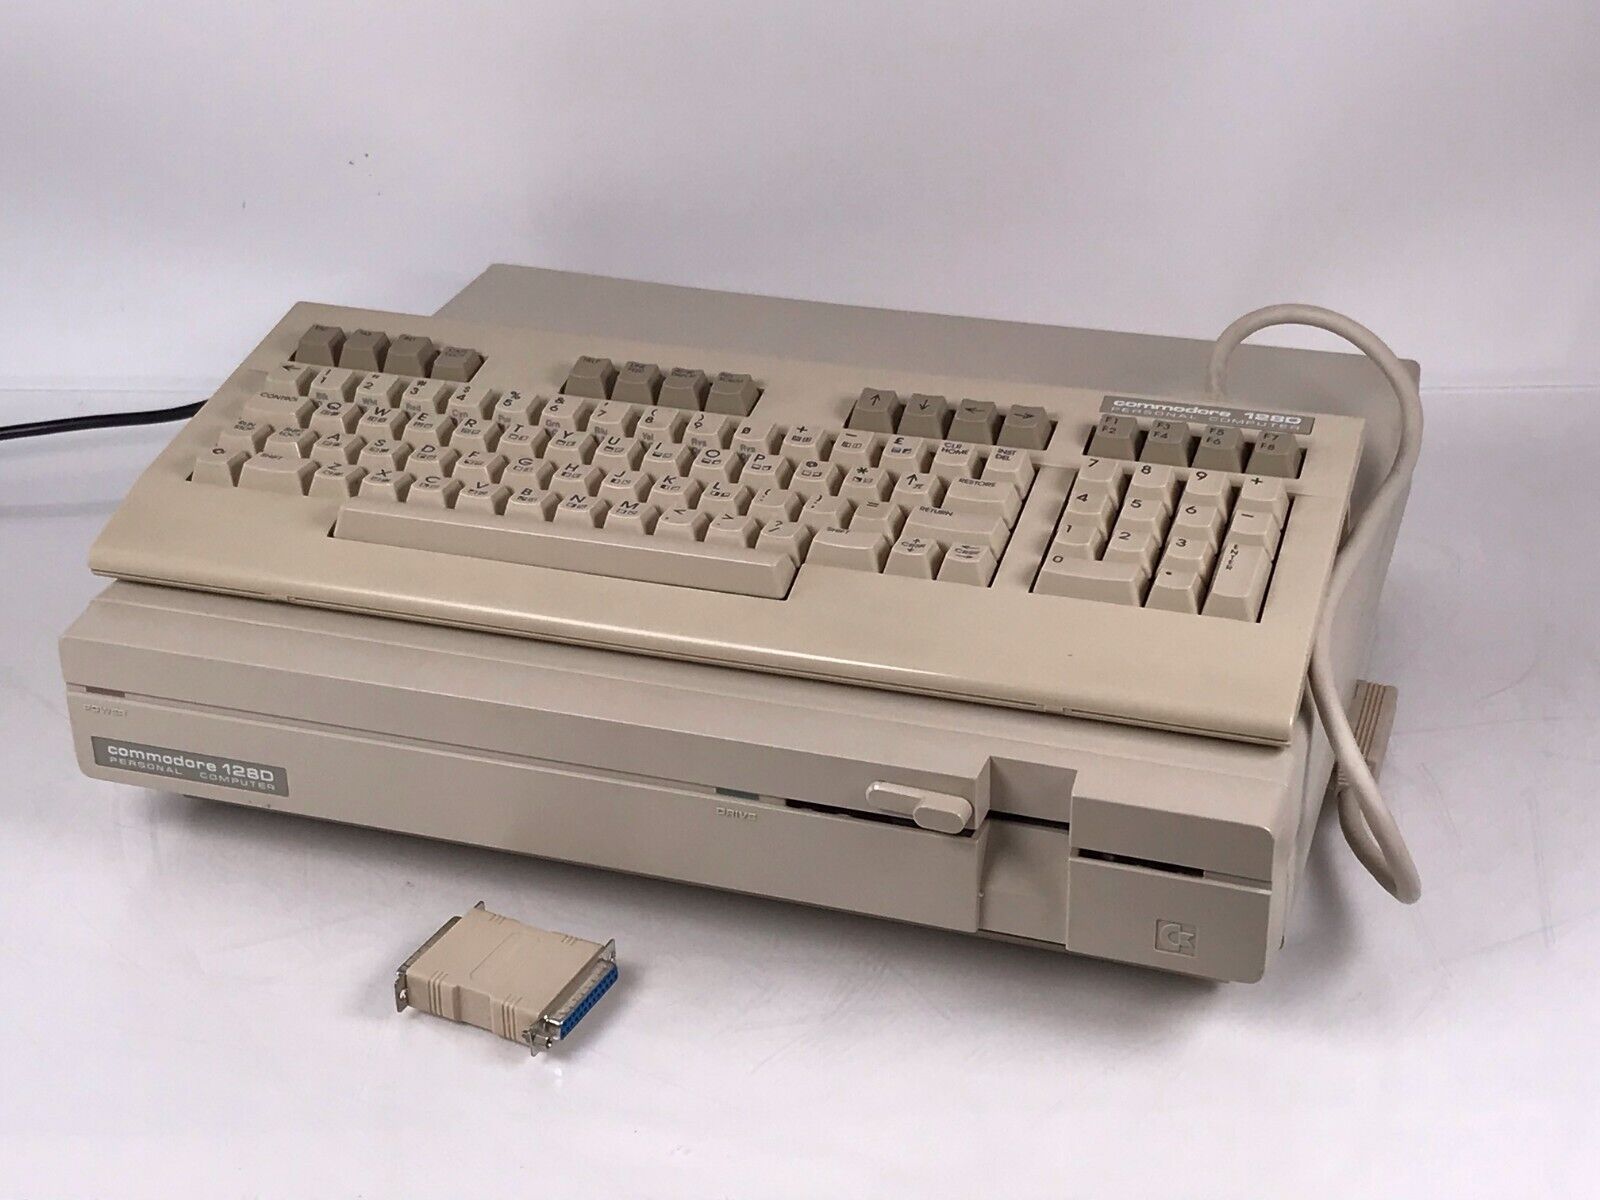 Commodore 1280 C128D Personal Computer w/ Keyboard - Outputs video see